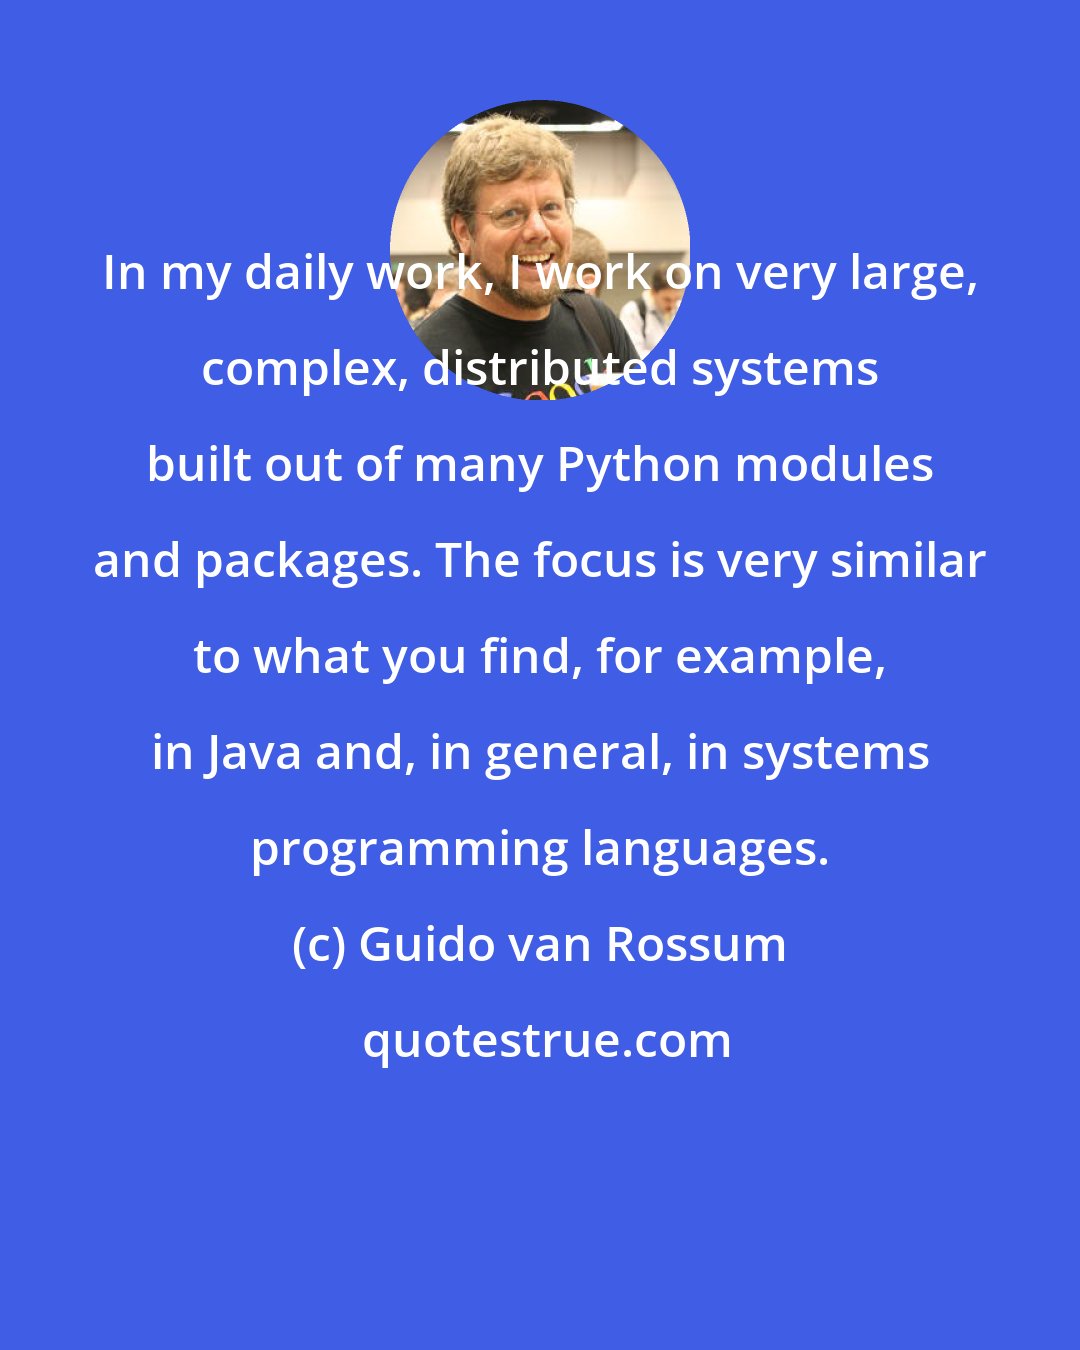 Guido van Rossum: In my daily work, I work on very large, complex, distributed systems built out of many Python modules and packages. The focus is very similar to what you find, for example, in Java and, in general, in systems programming languages.